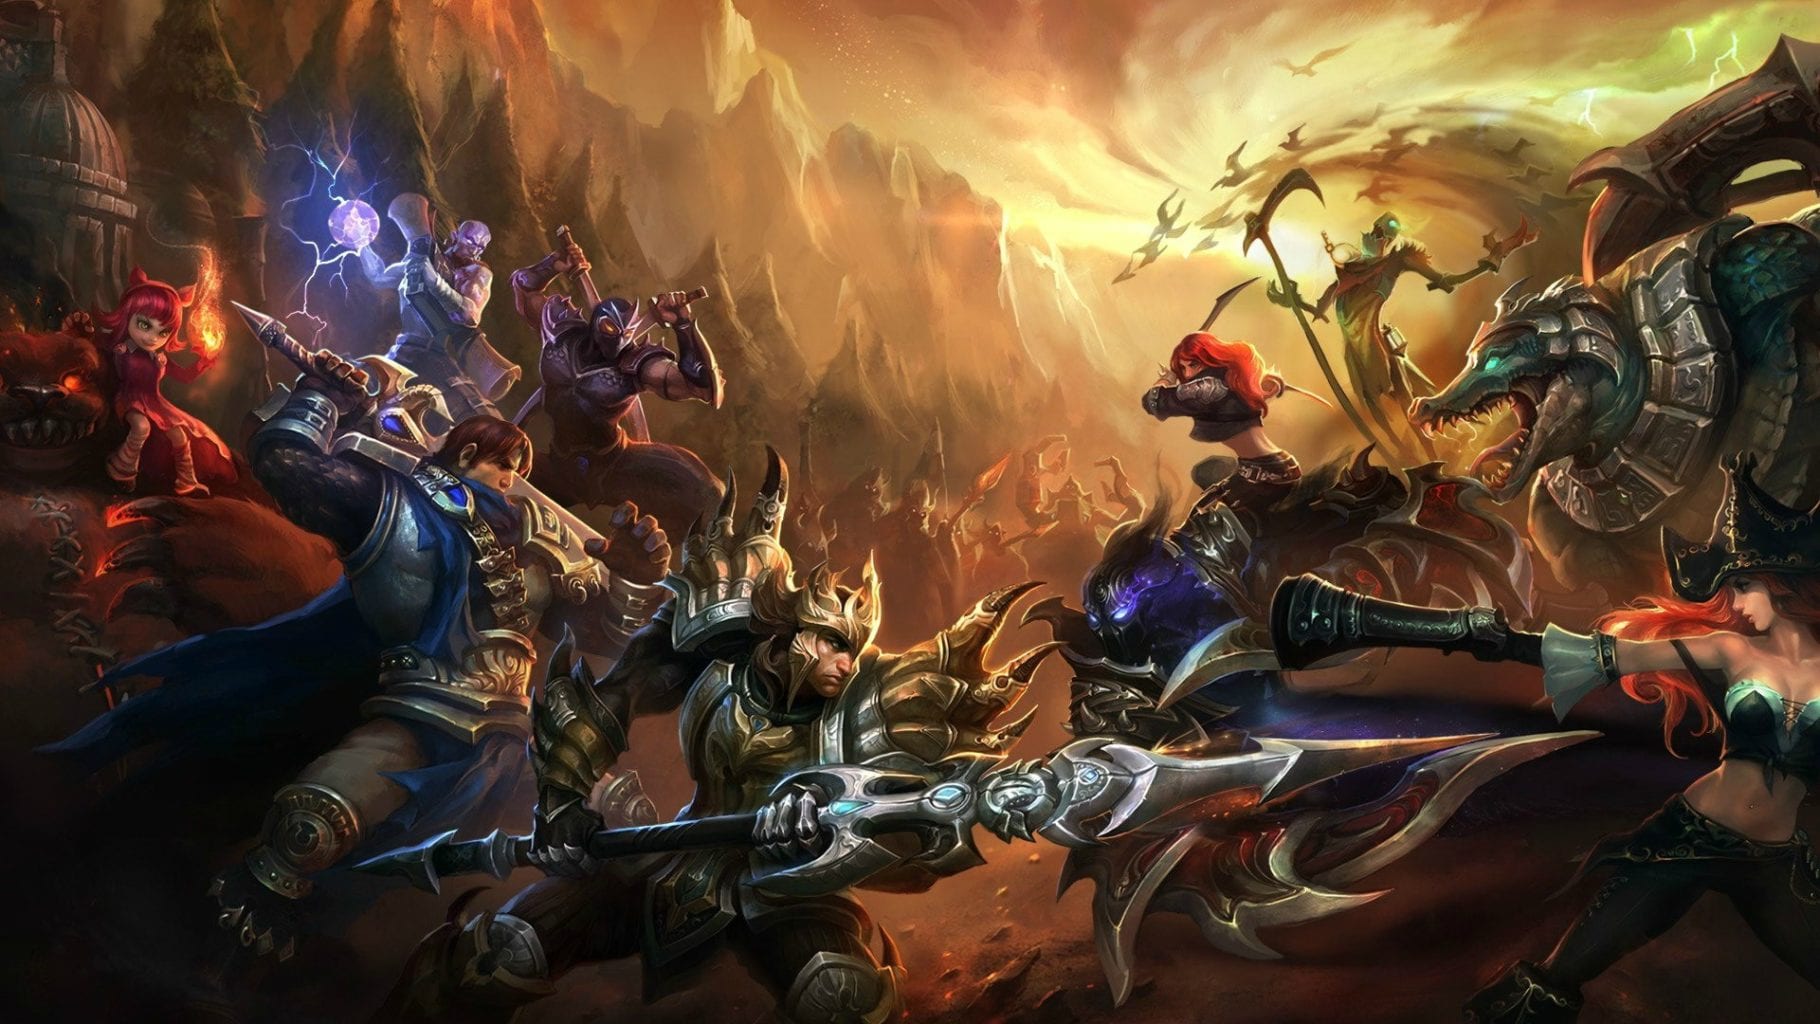 How to Download and Install League of Legends on Pc